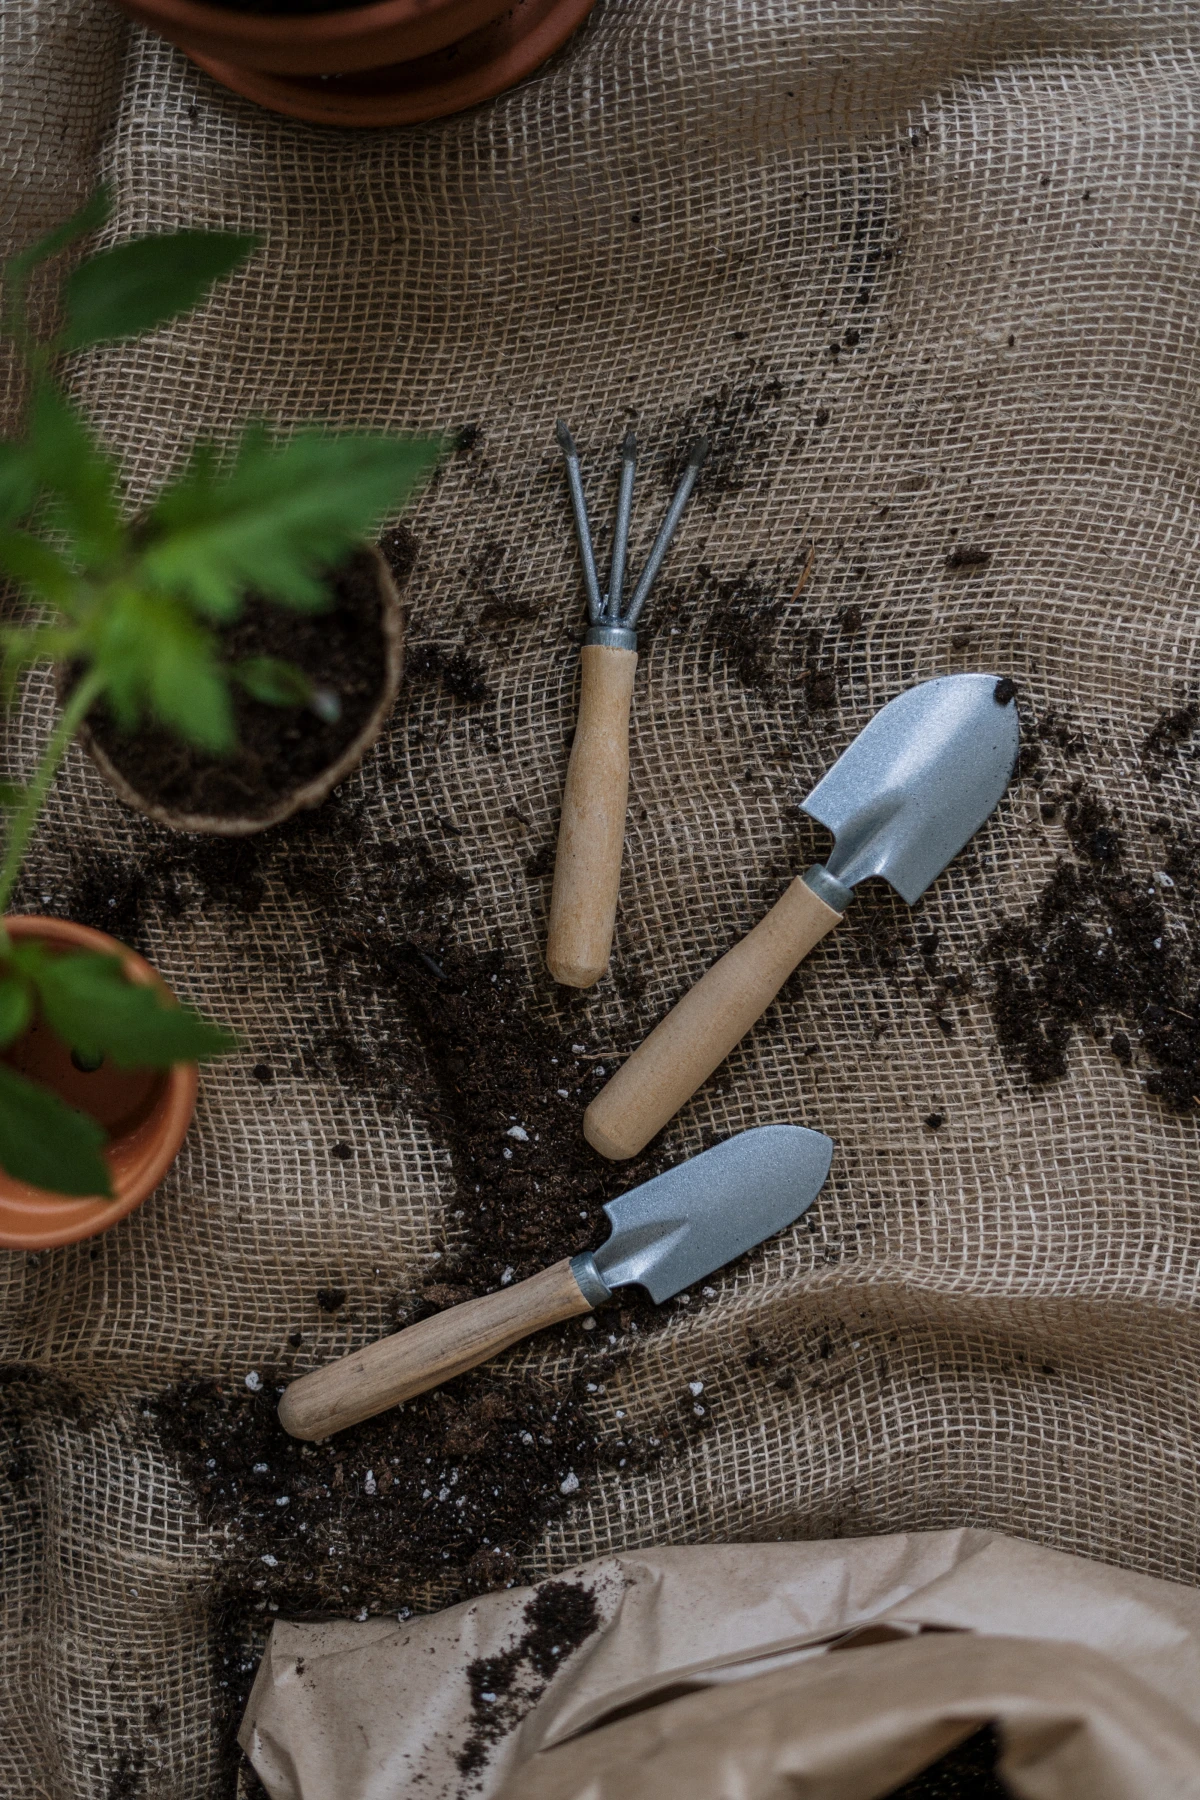 gardening tools with soil on them